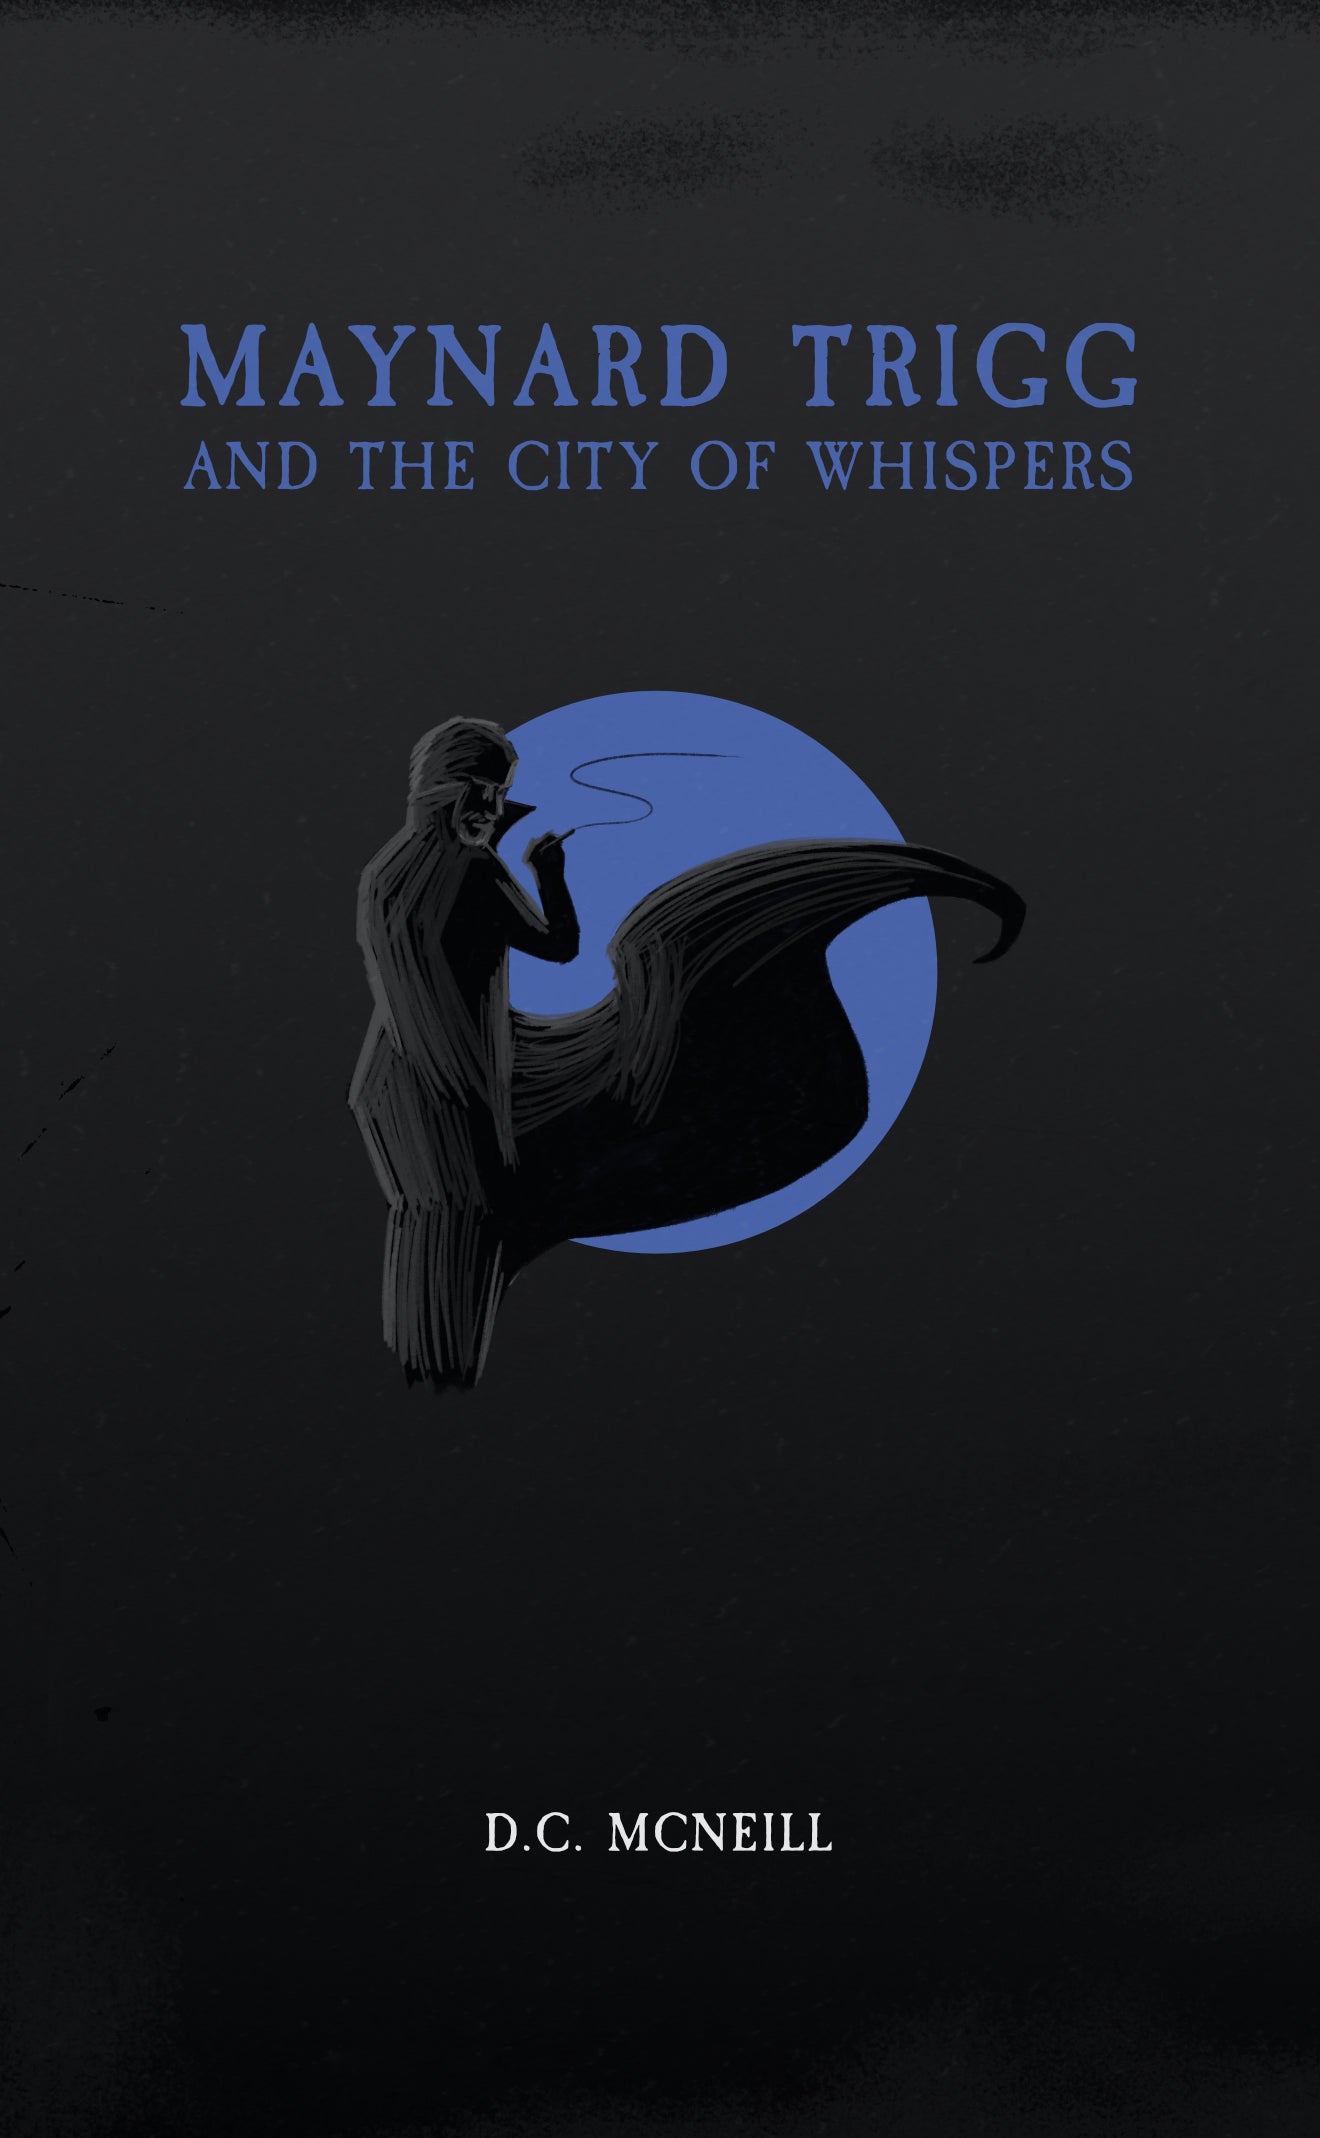 Maynard Trigg and The City of Whispers